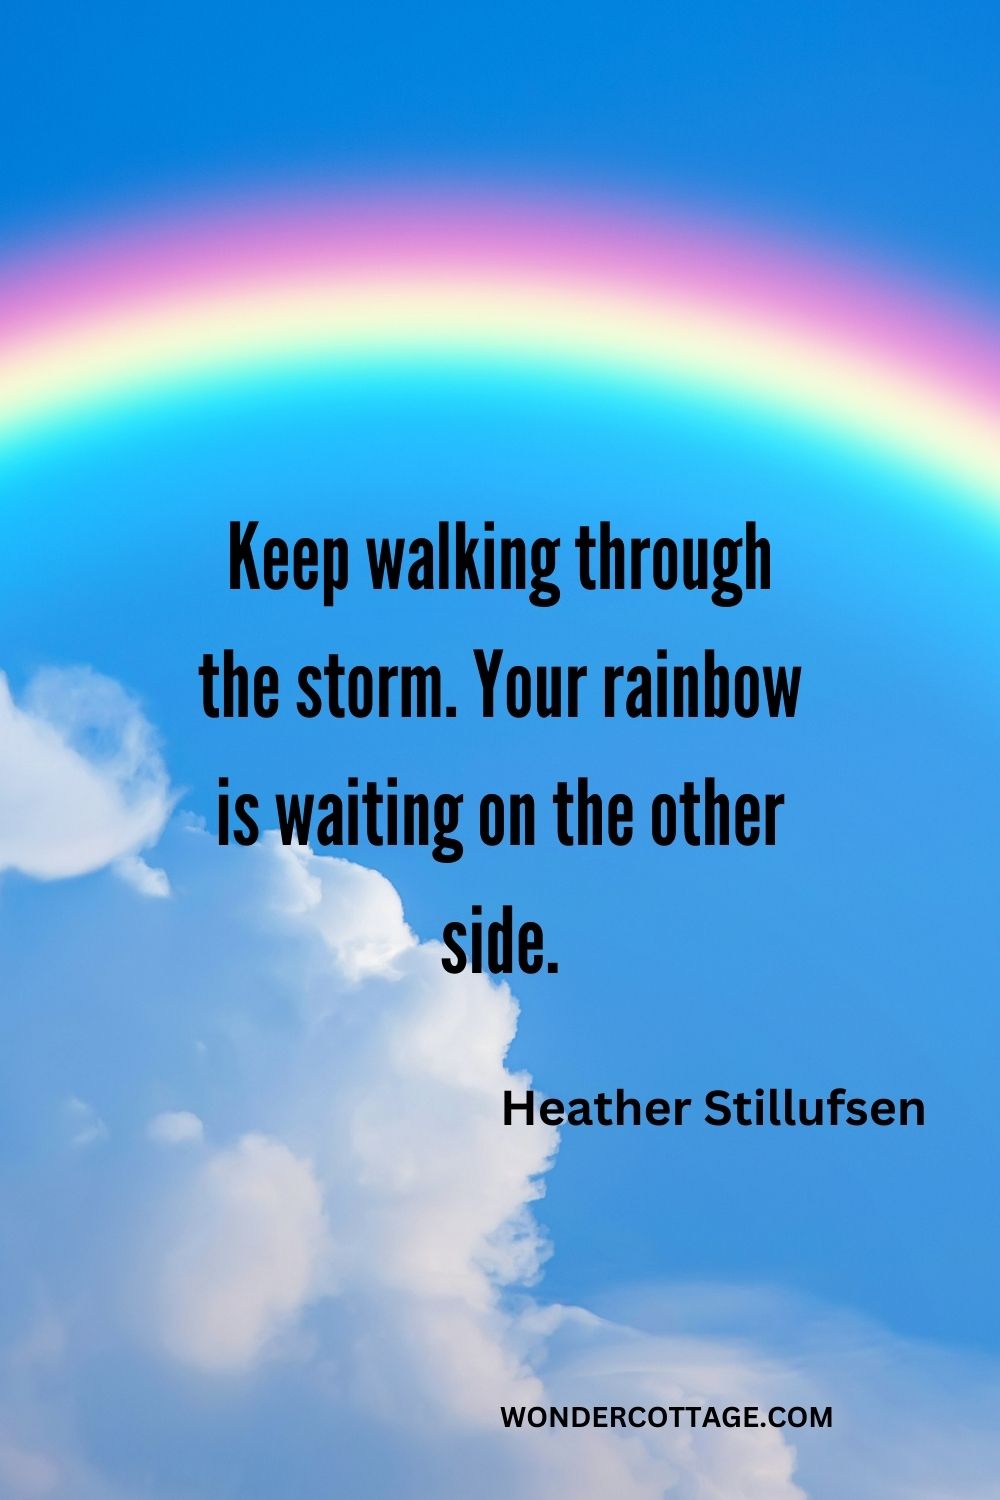 Keep walking through the storm. Your rainbow is waiting on the other side. Heather Stillufsen